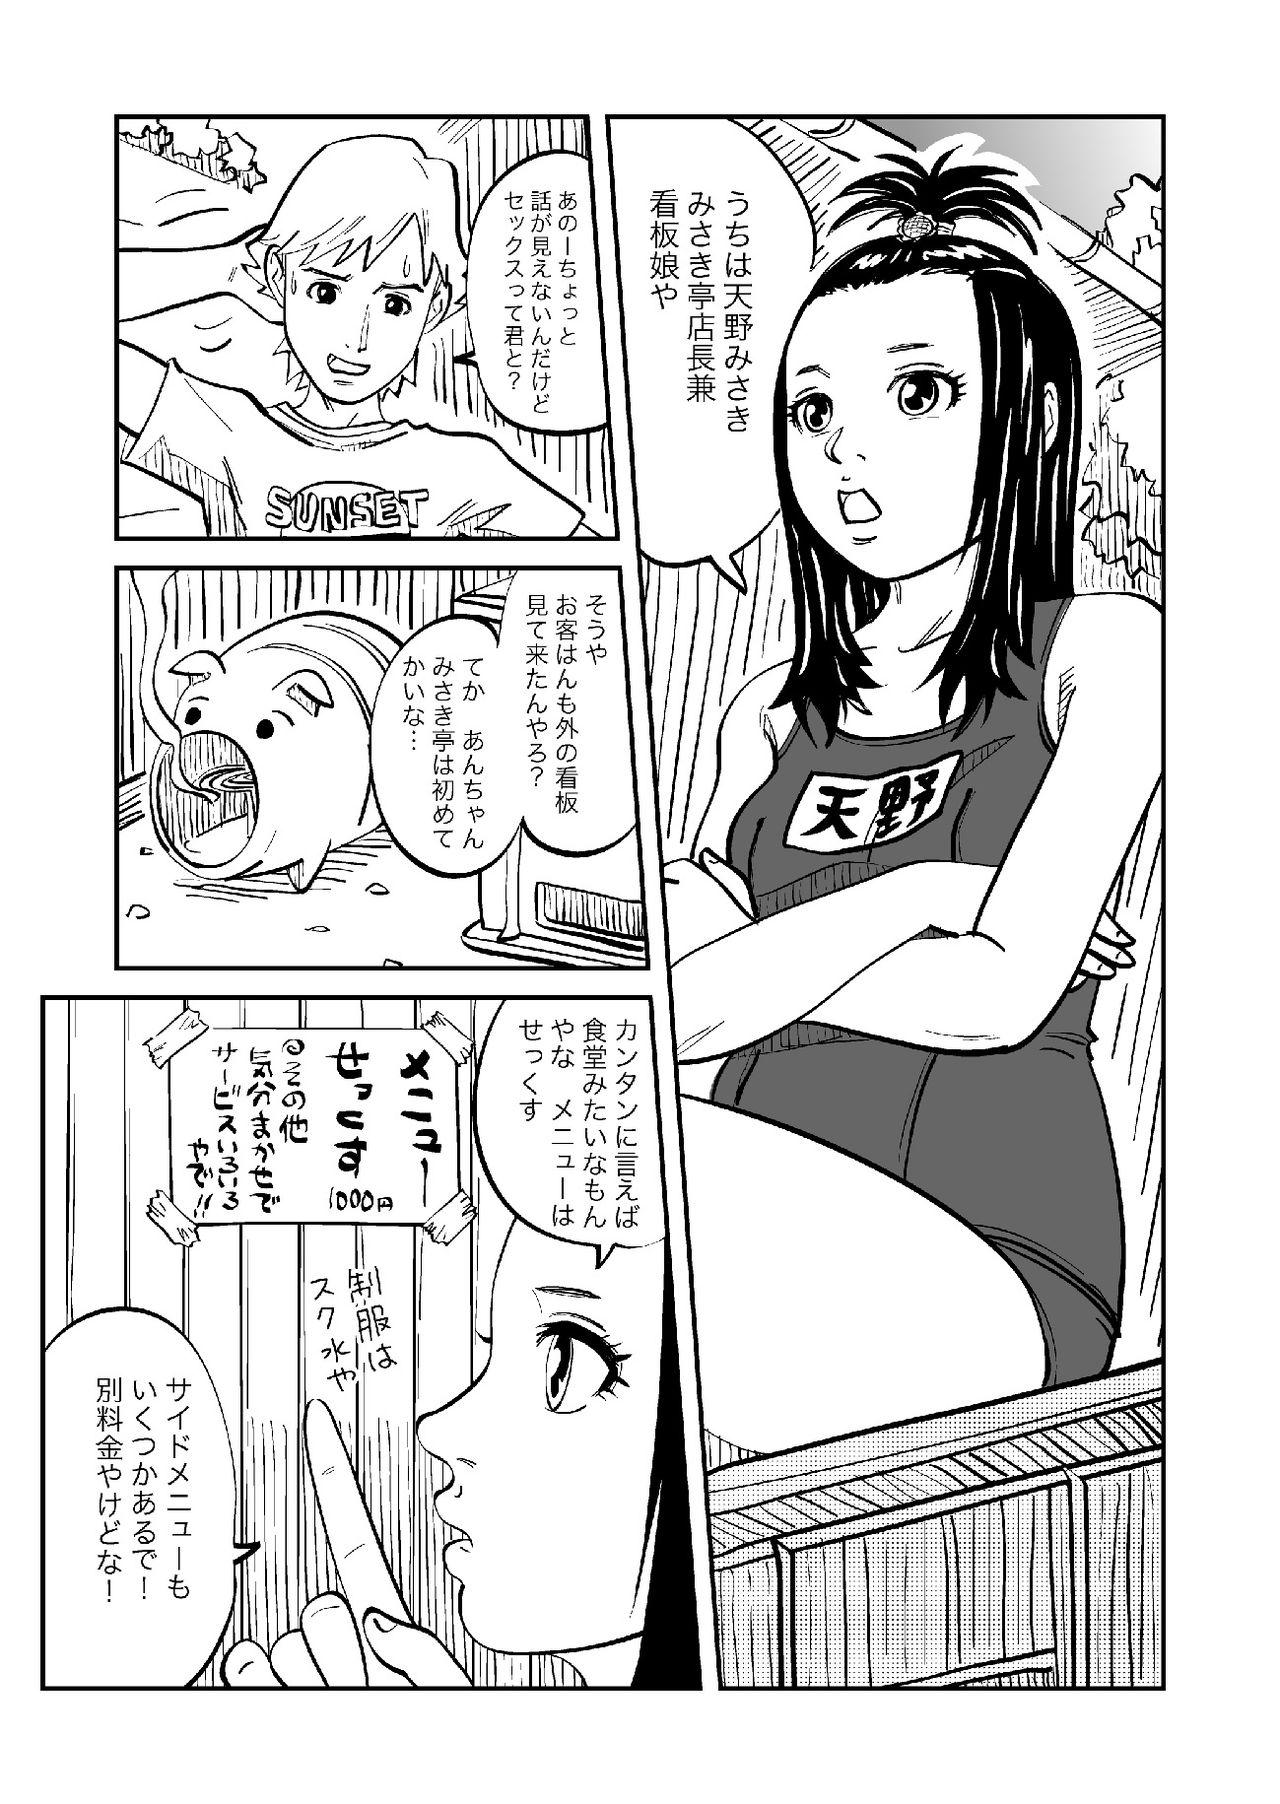 Cousin Rojiura Arbeit - Original 18 Year Old - Page 4